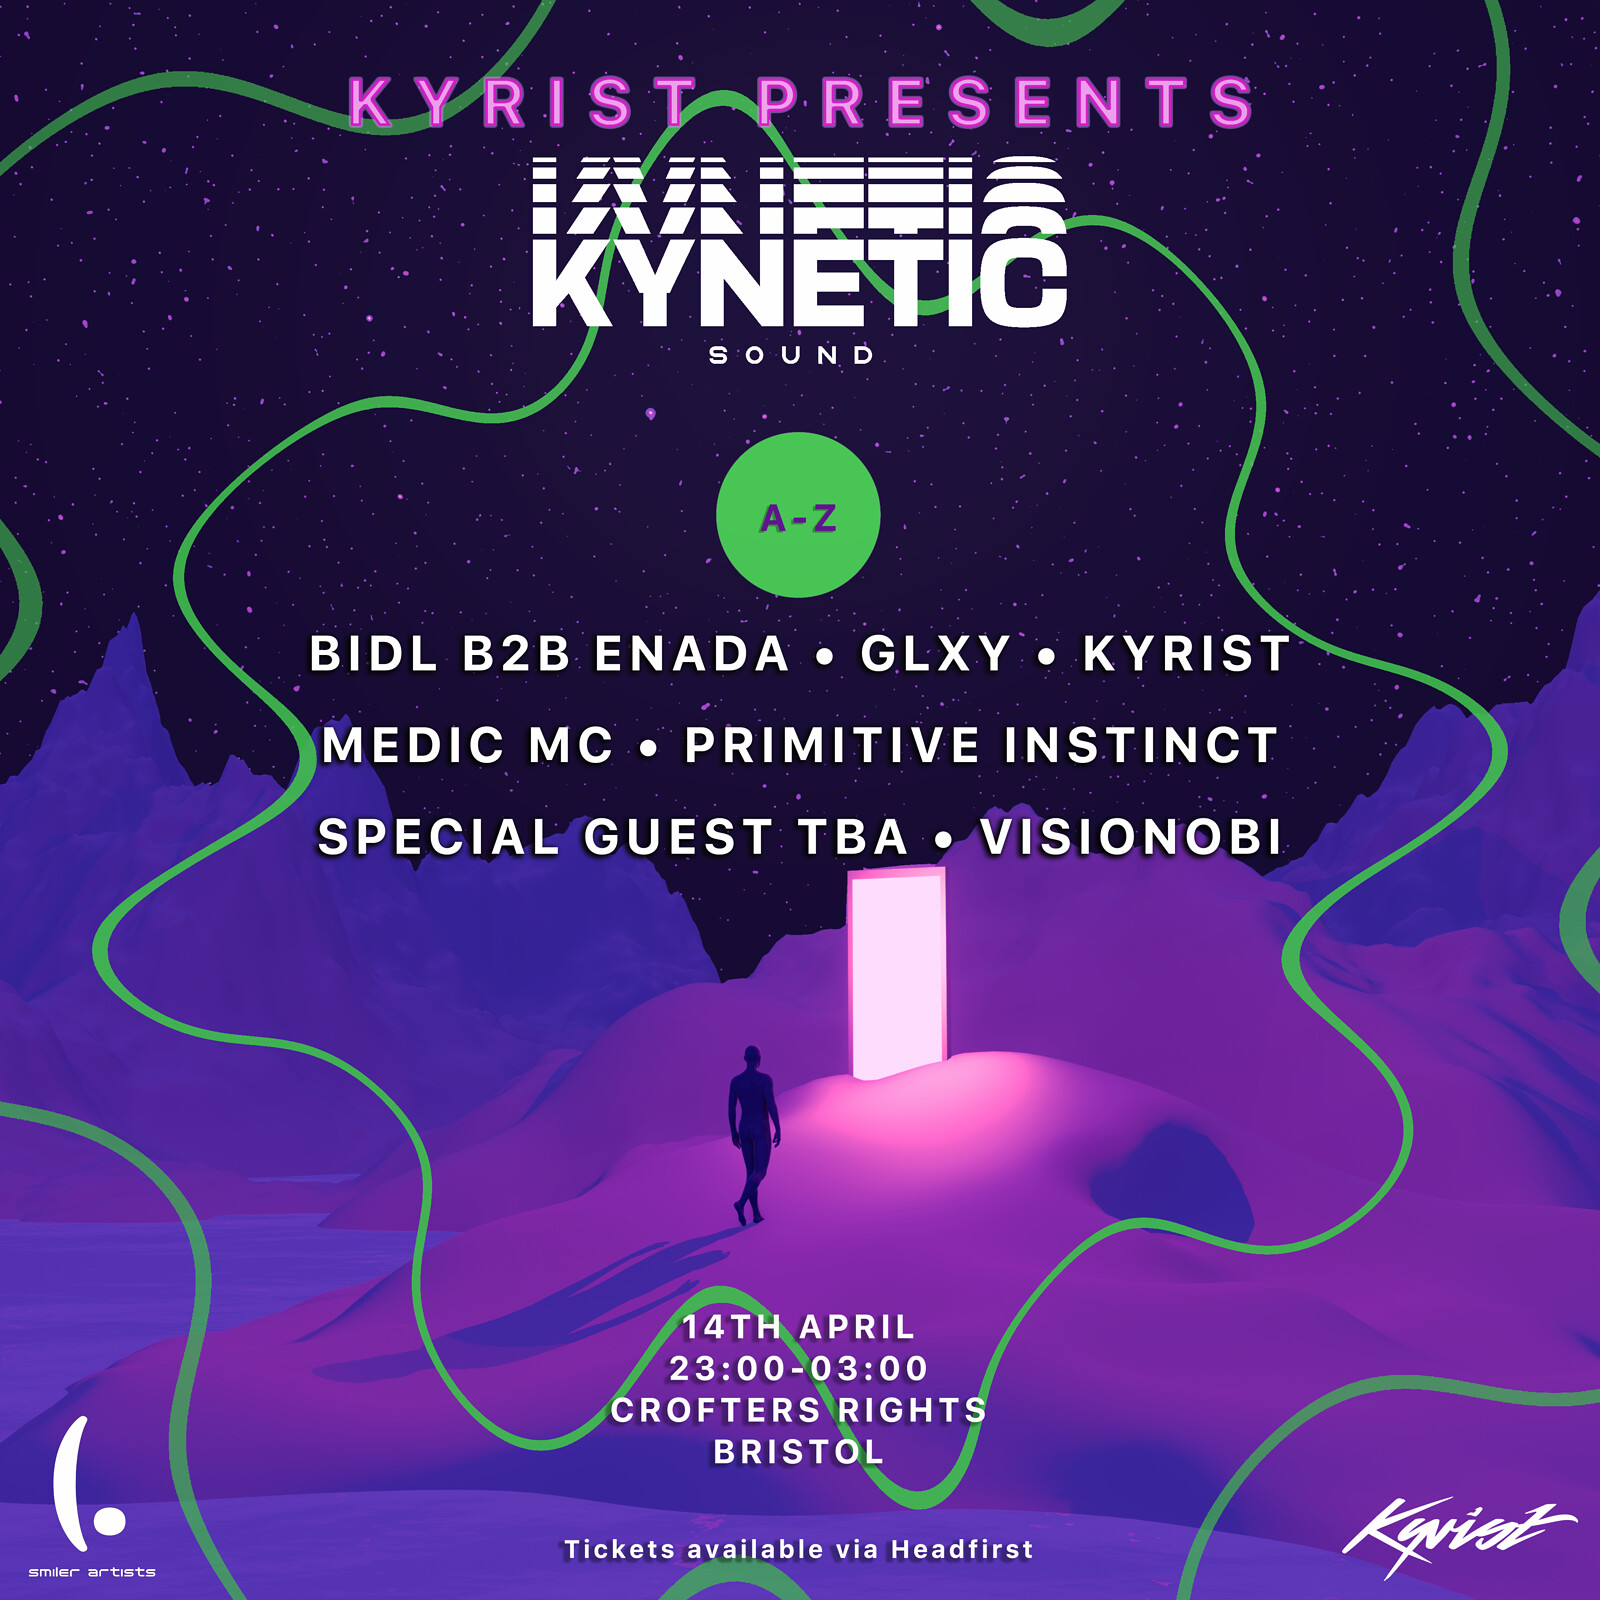 Kyrist presents: Kynetic Sound Launch Party at Crofters Rights